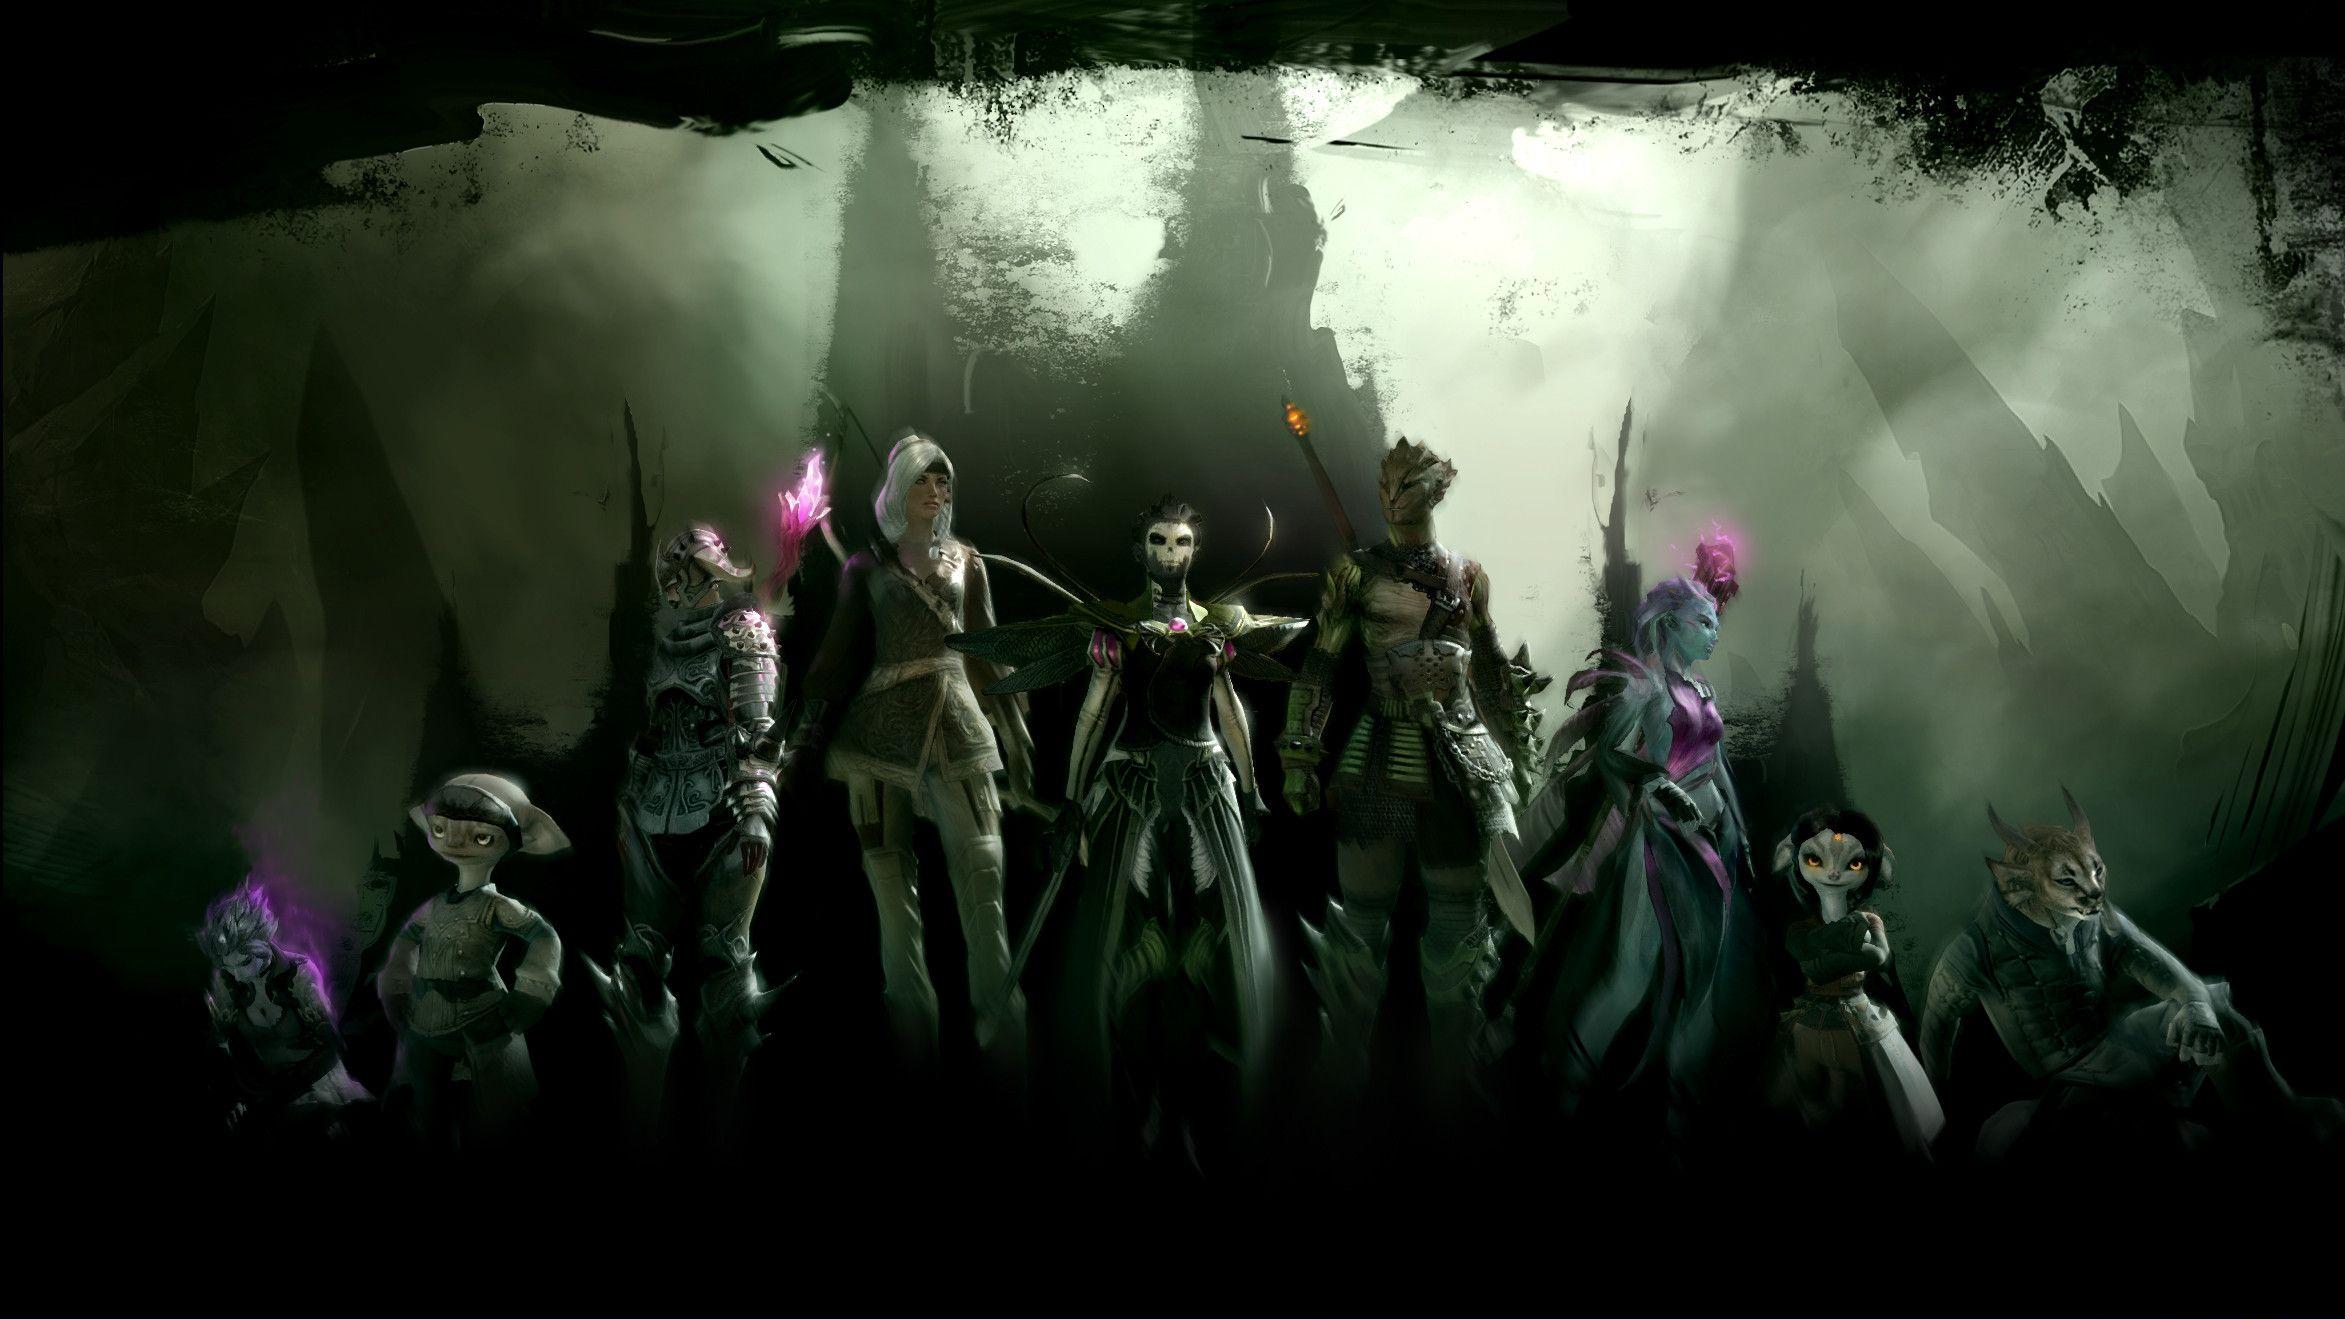 gw2 background 2. Background Check All